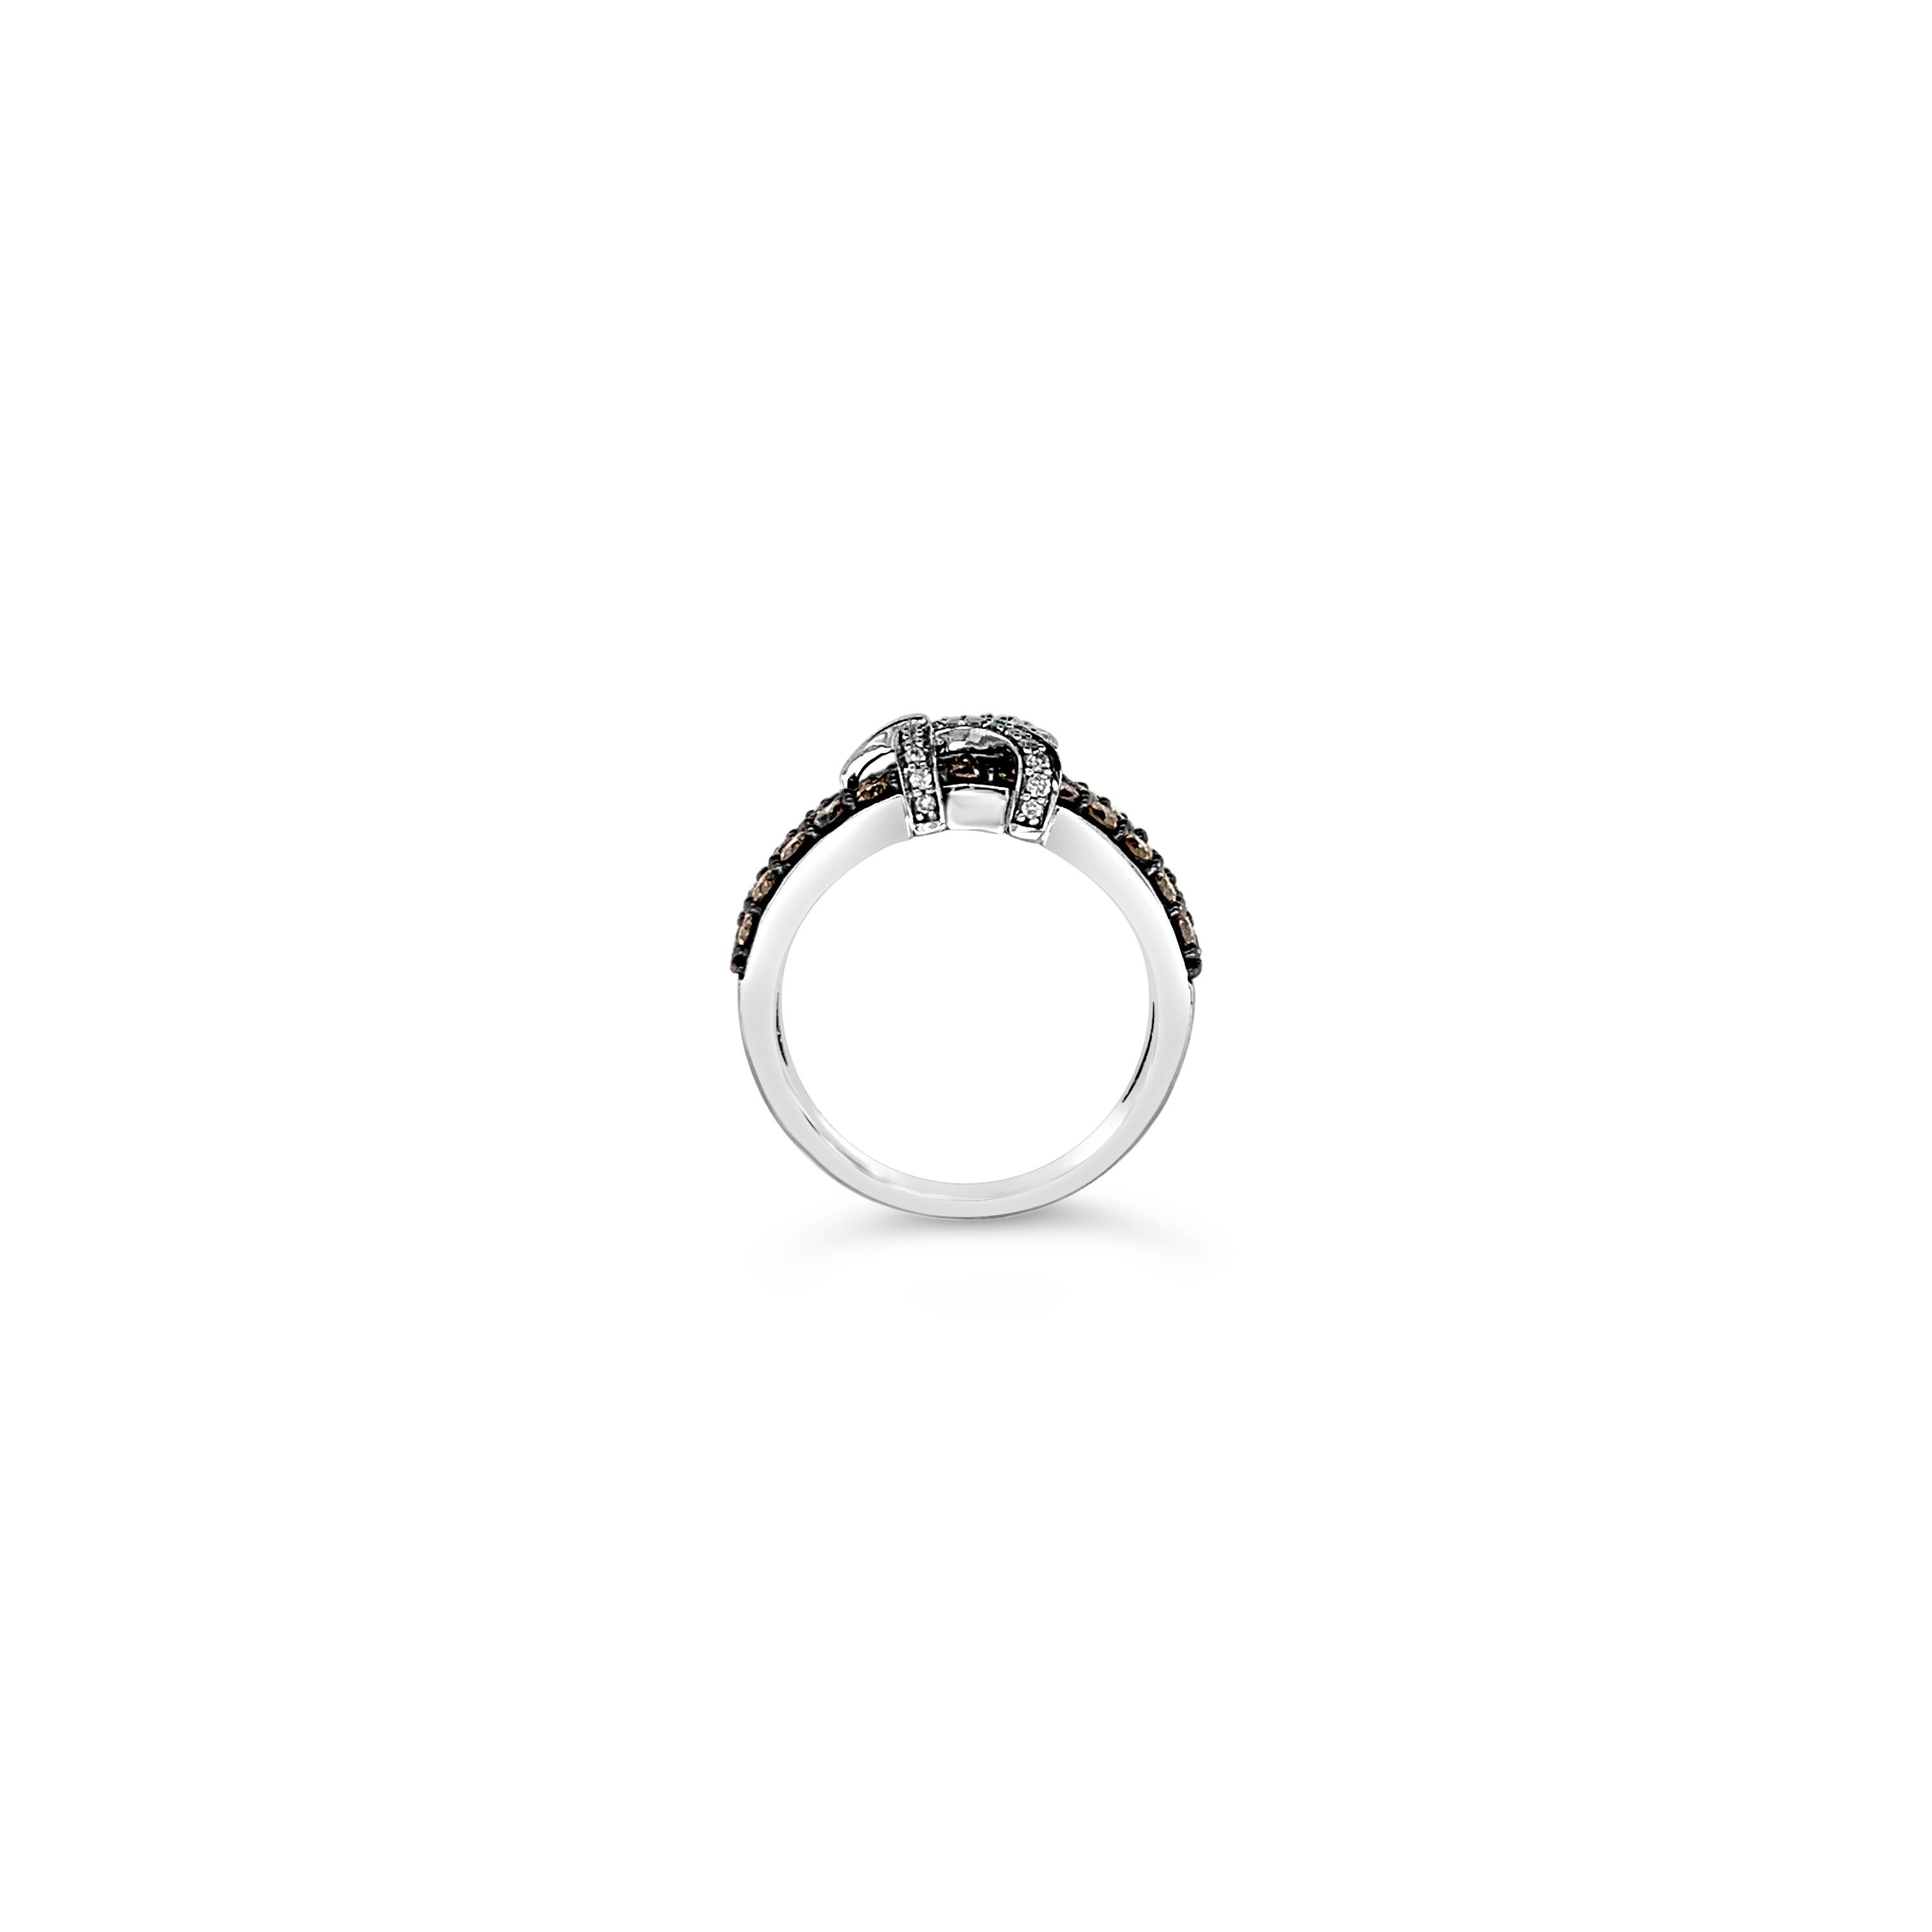 Le Vian® Ring featuring 1.30 cts. Chocolate Diamonds®, .10 cts. Vanilla Diamonds® set in 14K Vanilla Gold®

Diamonds Breakdown:
1.30 cts Brown Diamonds
.10 cts White Diamonds

Gems Breakdown:
None

Ring may or may not be sizable, please feel free to